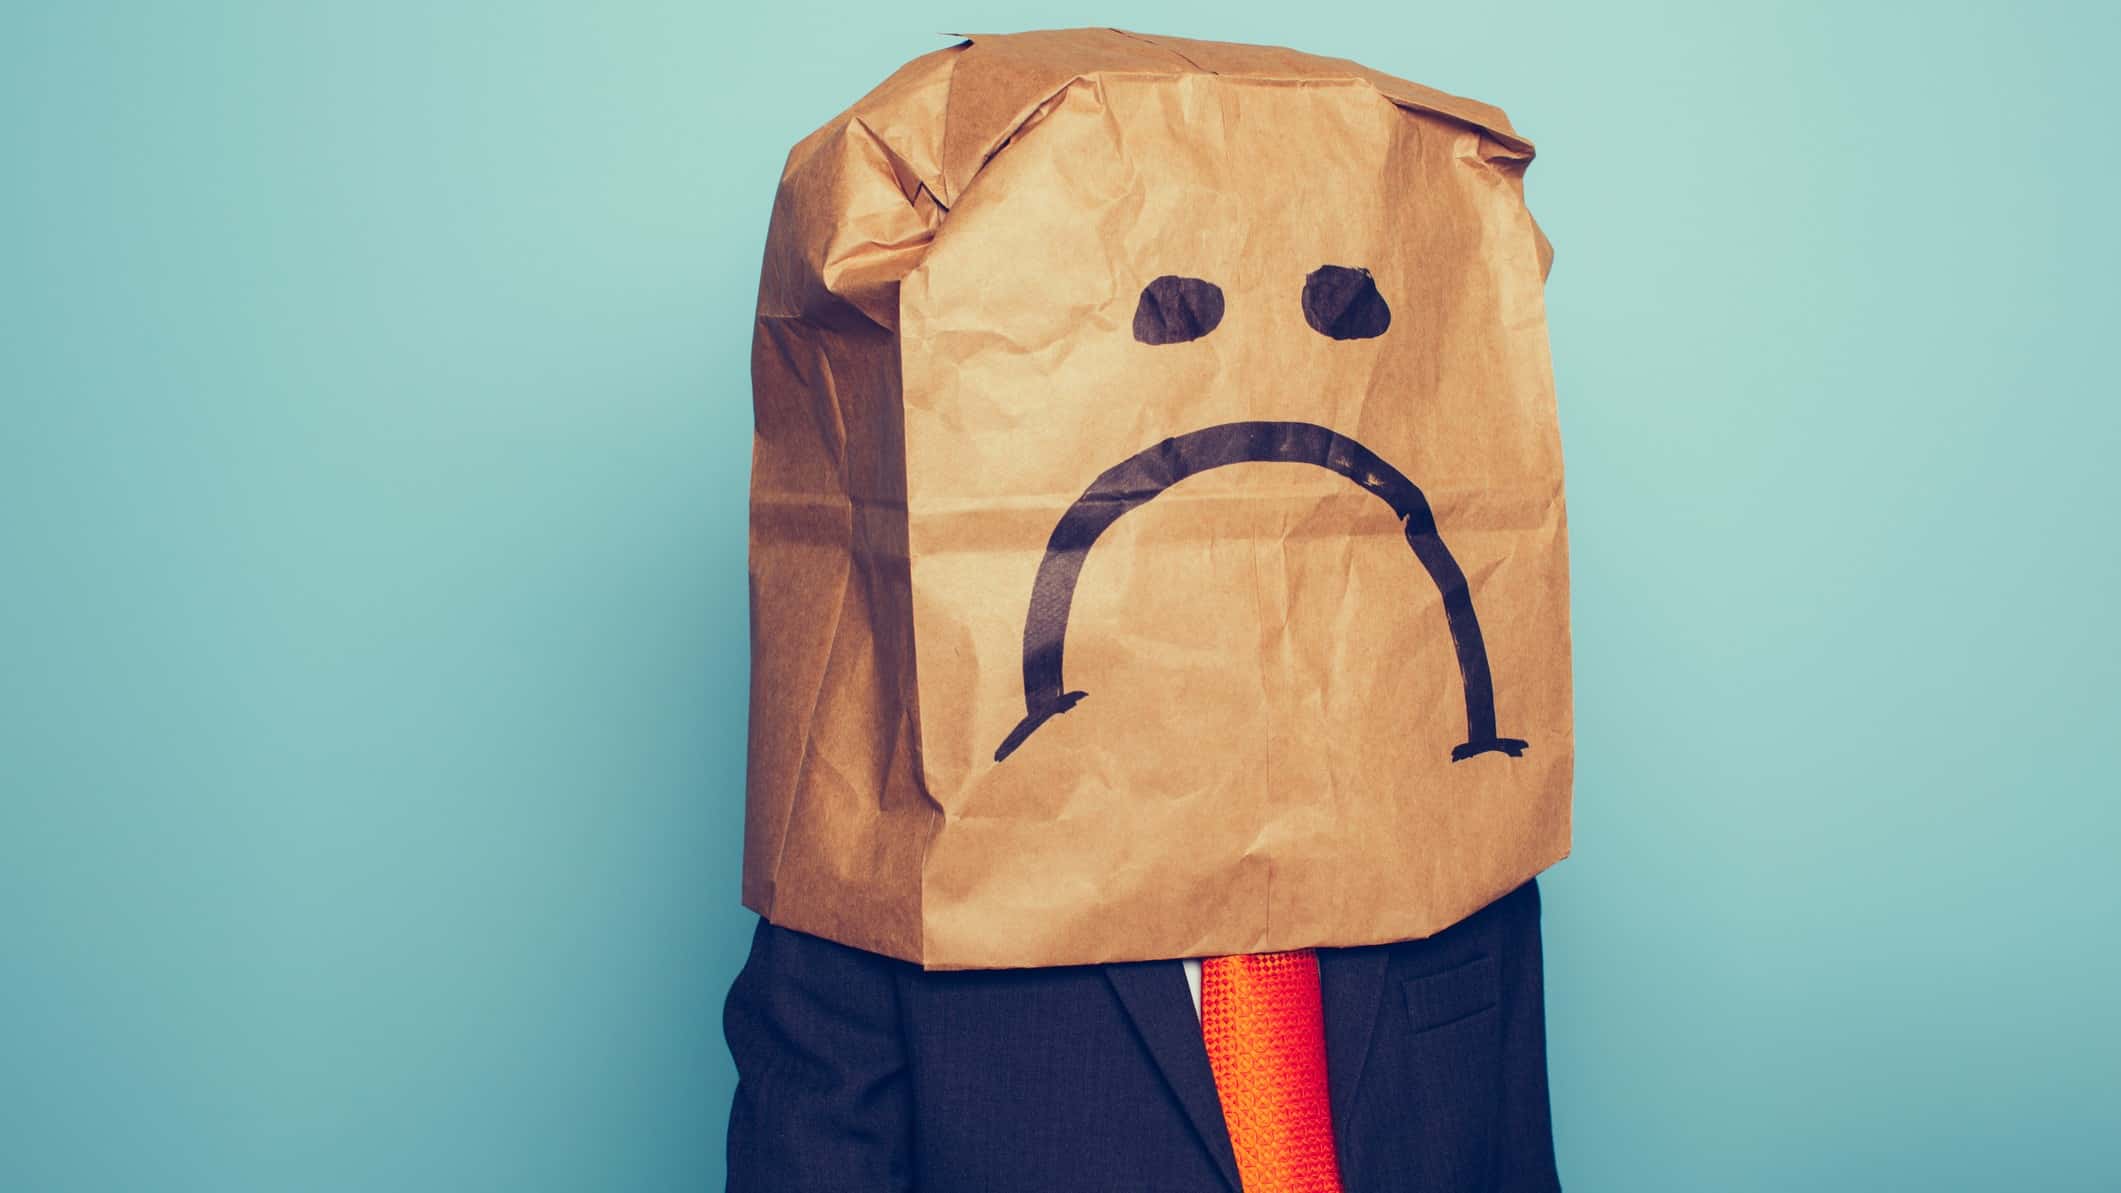 asx shares falling lower represented by investor wearing paper bag on head with sad face